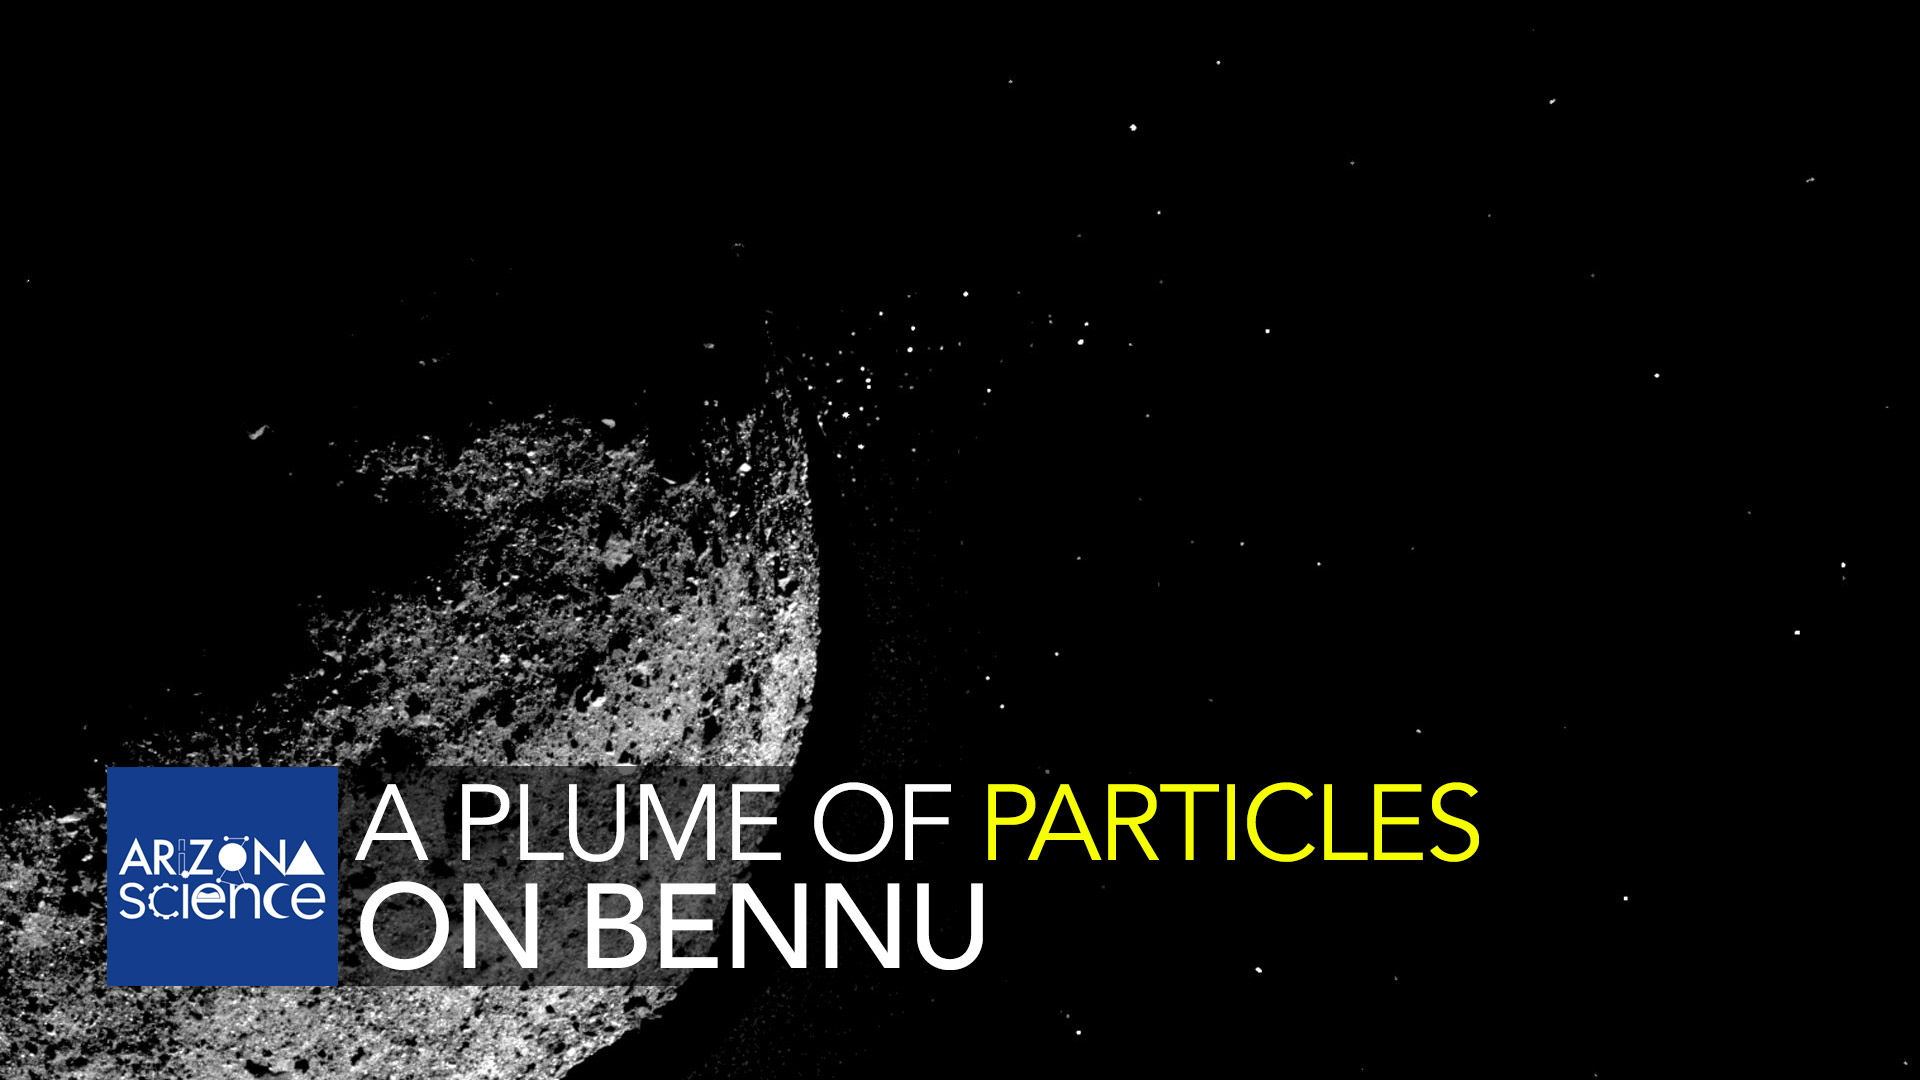 OSIRIS-REx captured pictures of particles around Bennu earlier this year.